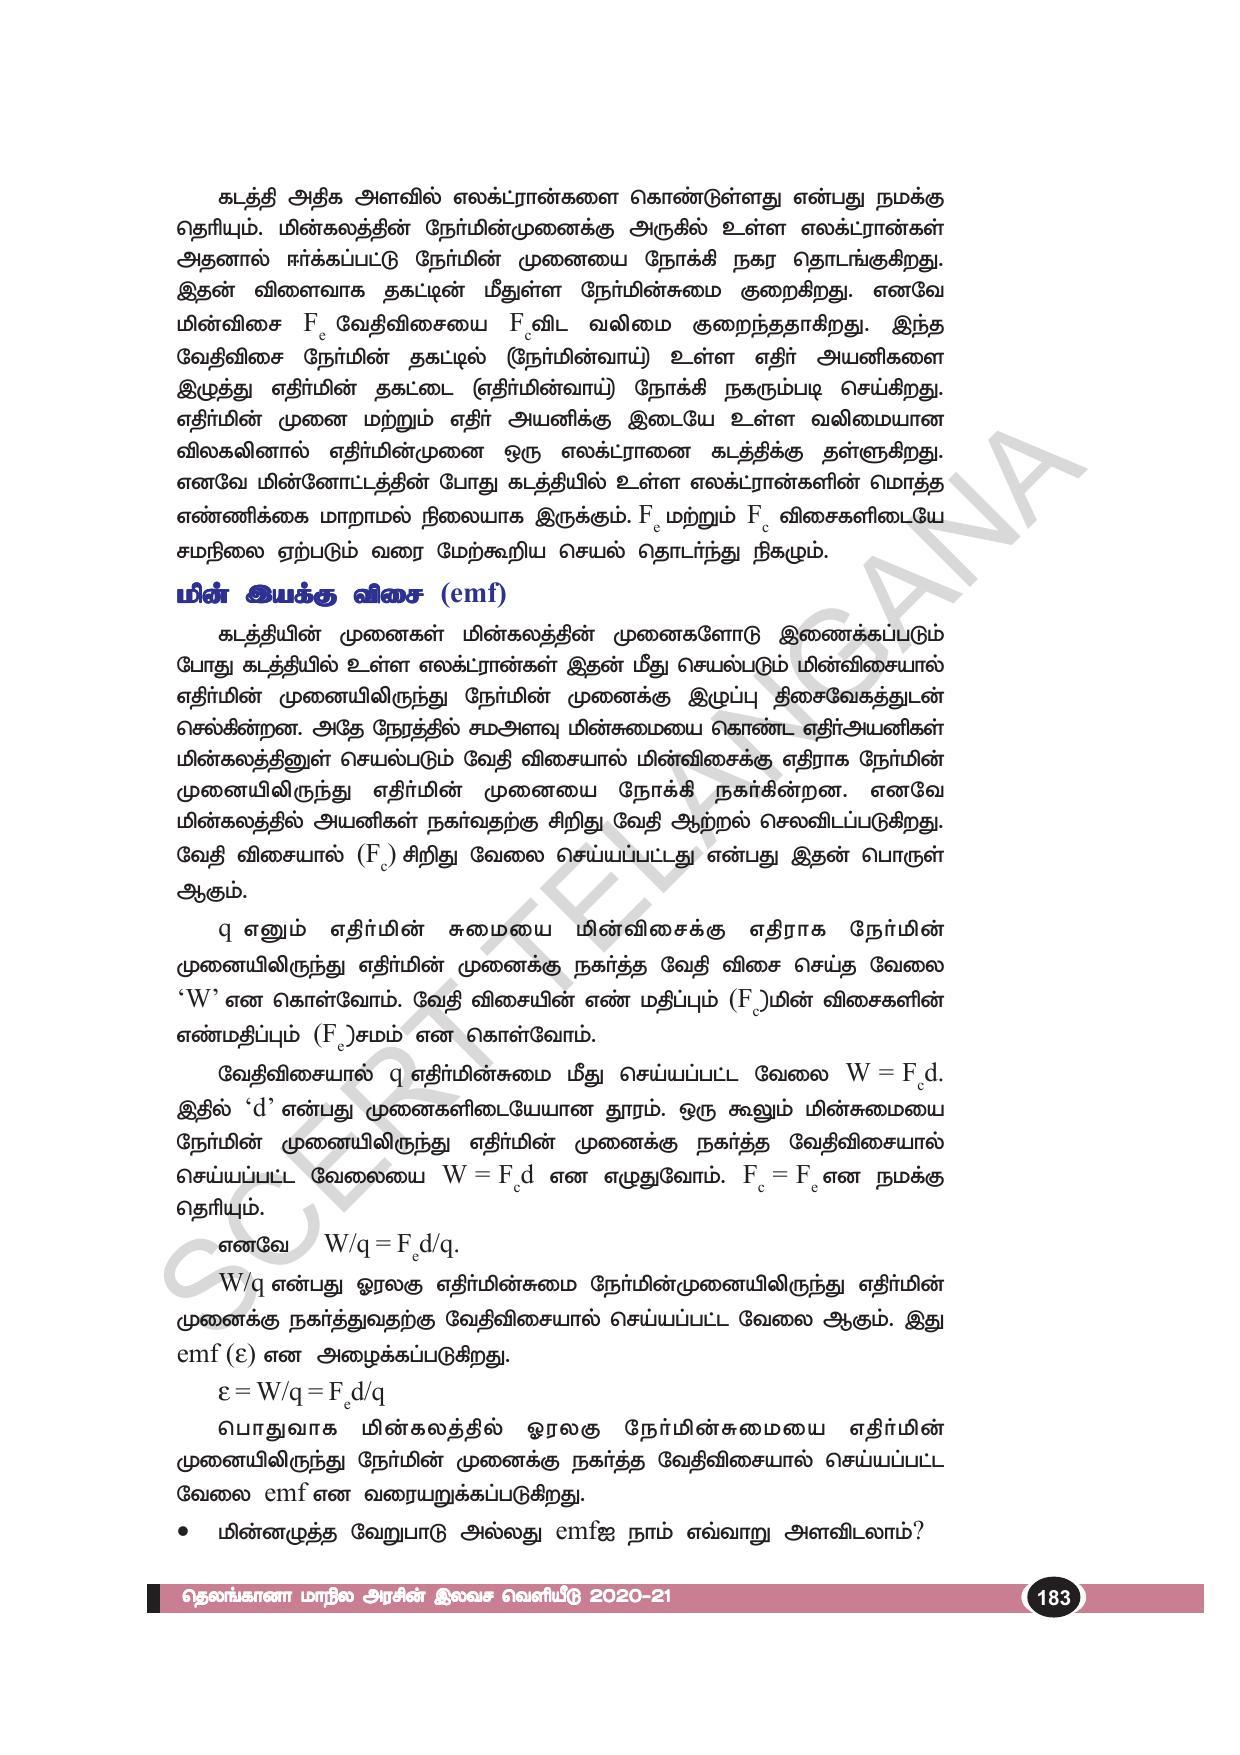 TS SCERT Class 10 Physical Science(Tamil Medium) Text Book - Page 195